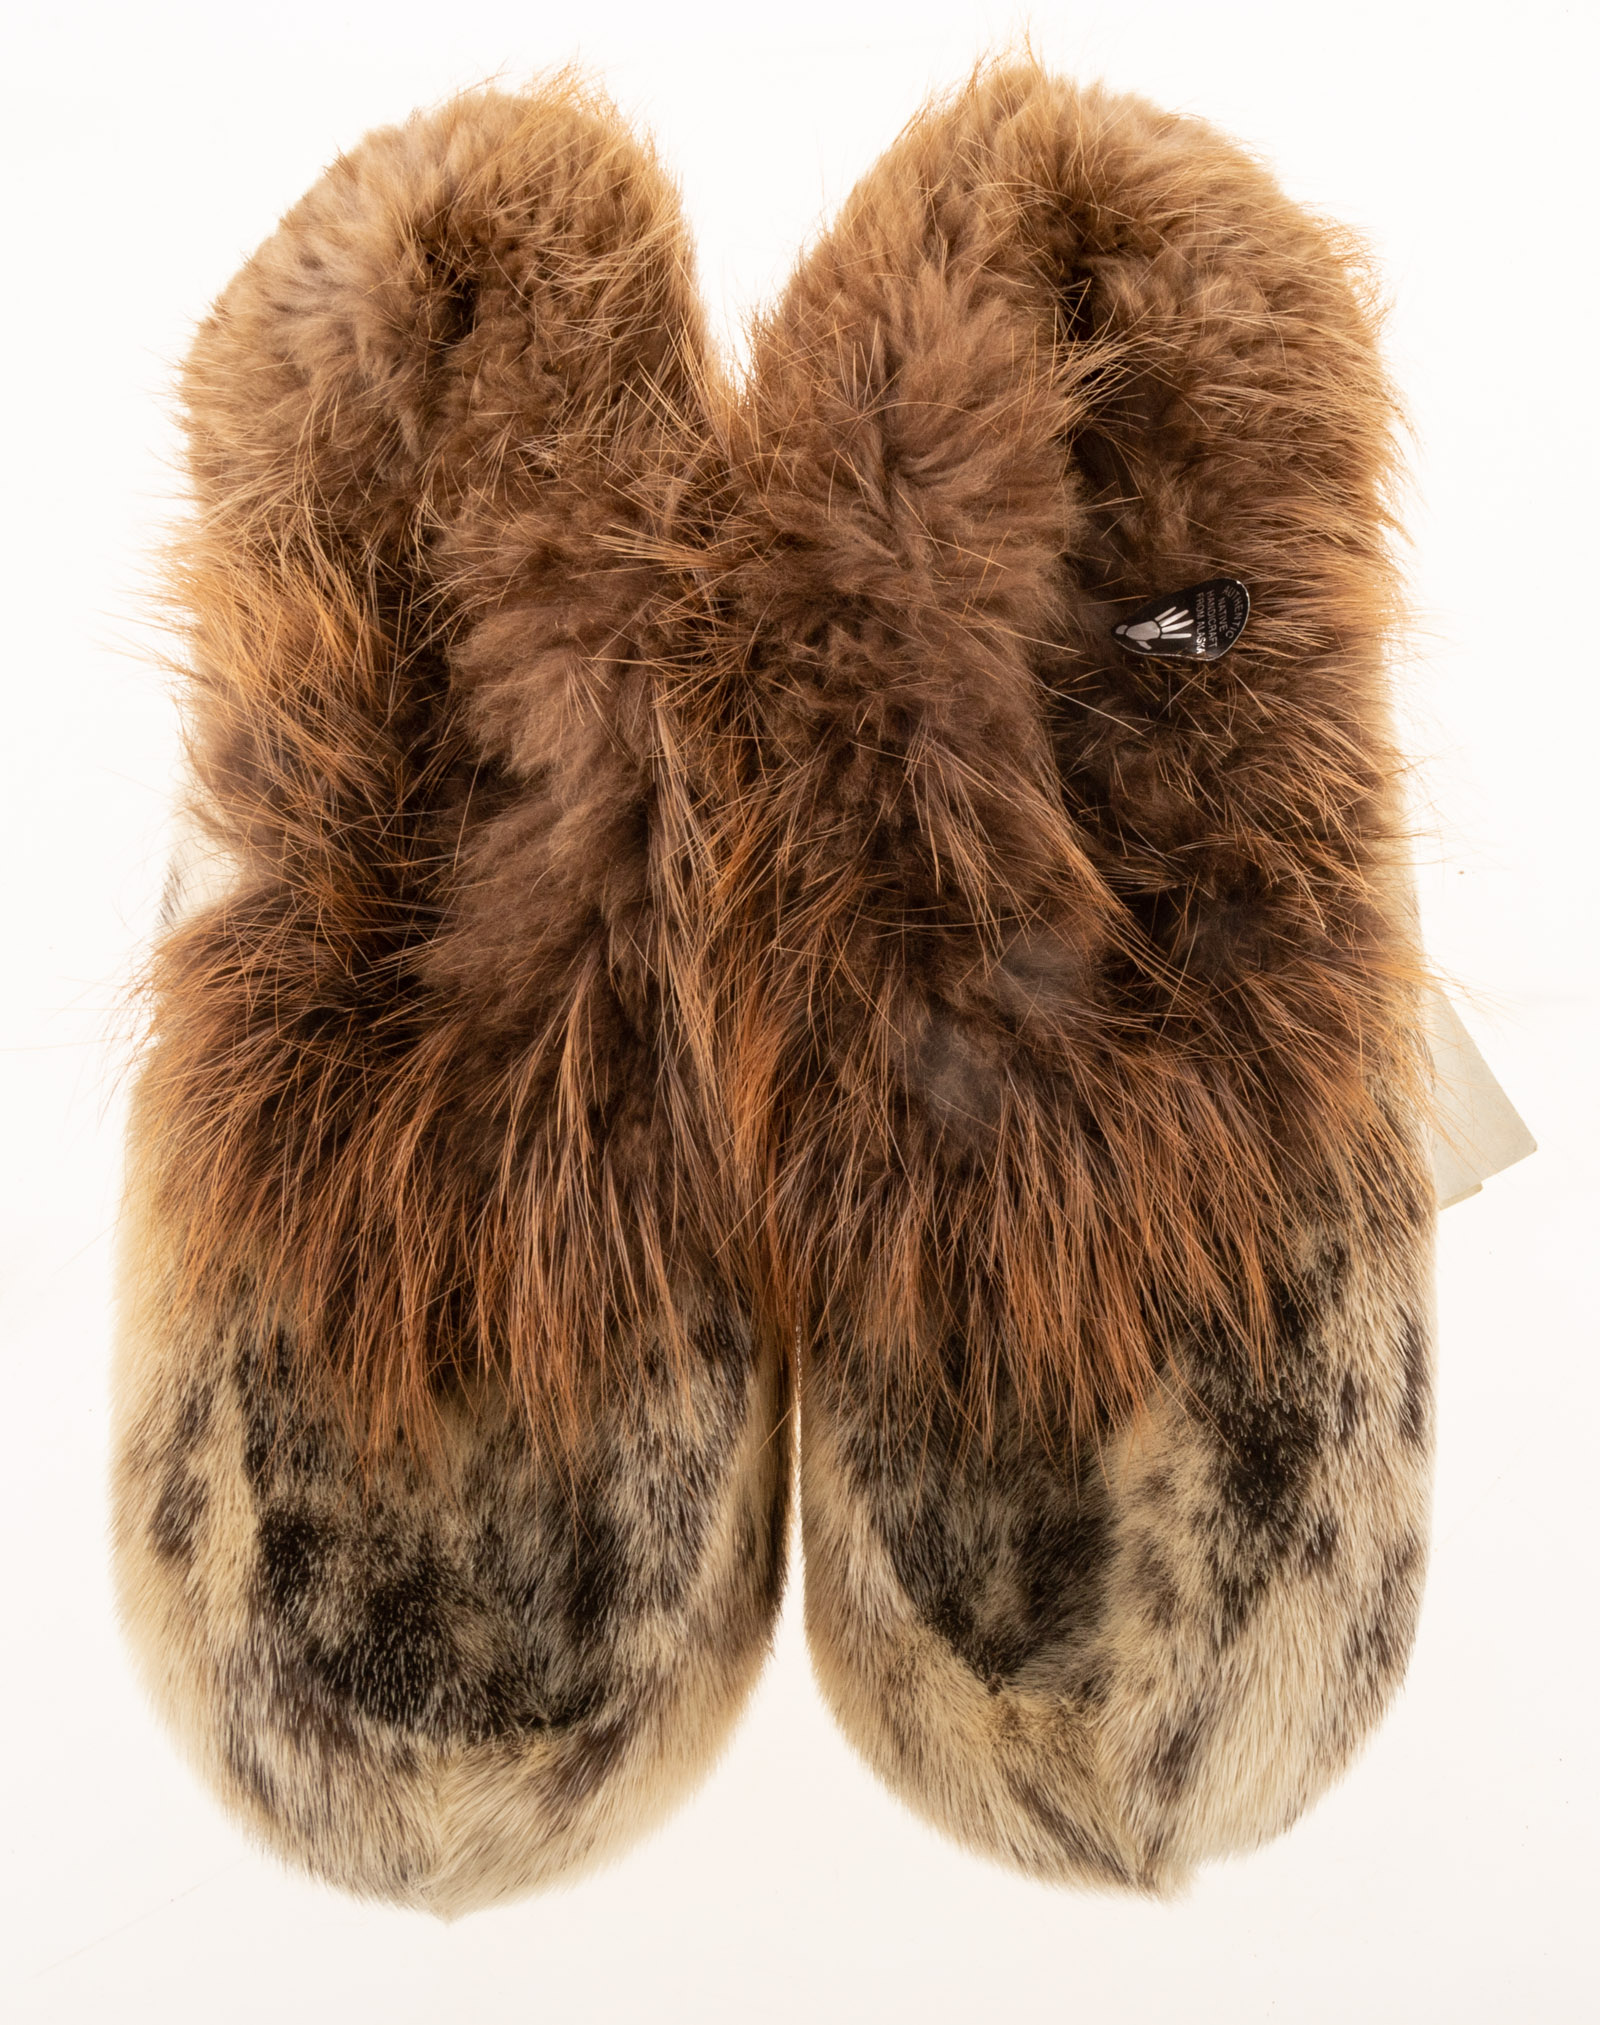 A PAIR OF SEAL SKIN SLIPPERS Marked